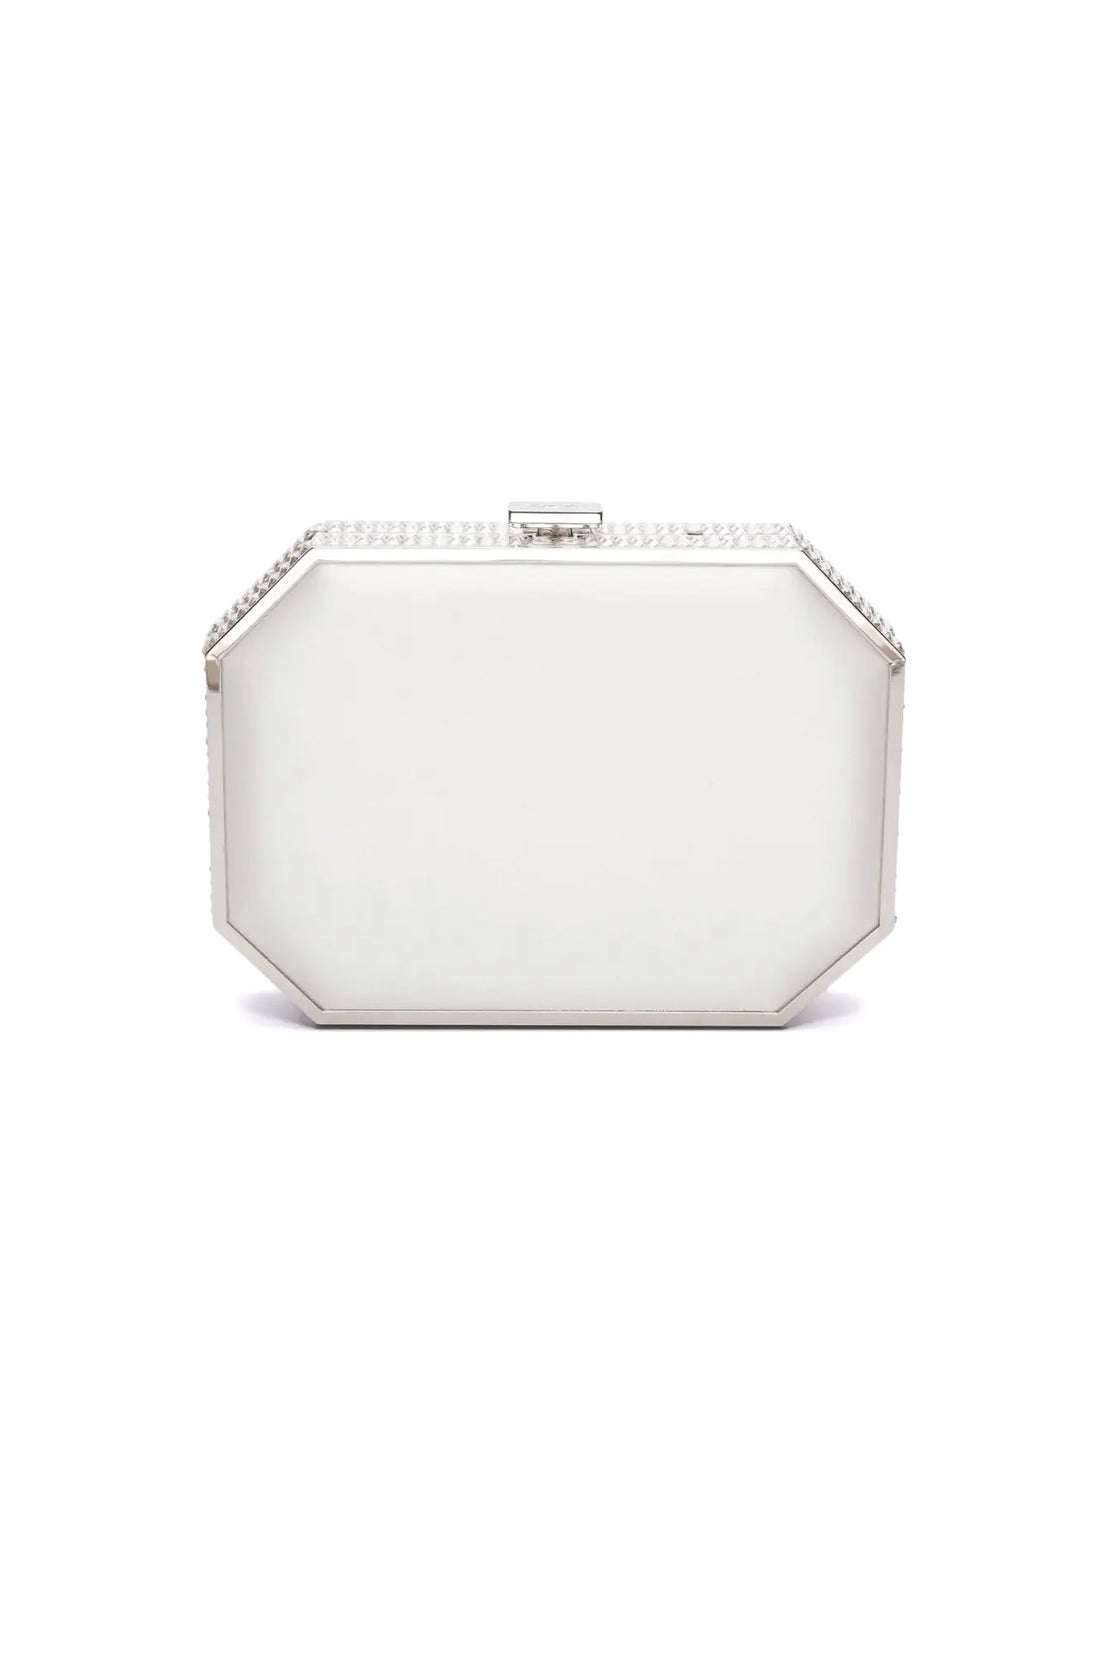 White satin hexagonal Como Clutch x MICAELA purse with rhinestone detailing by The Bella Rosa Collection.